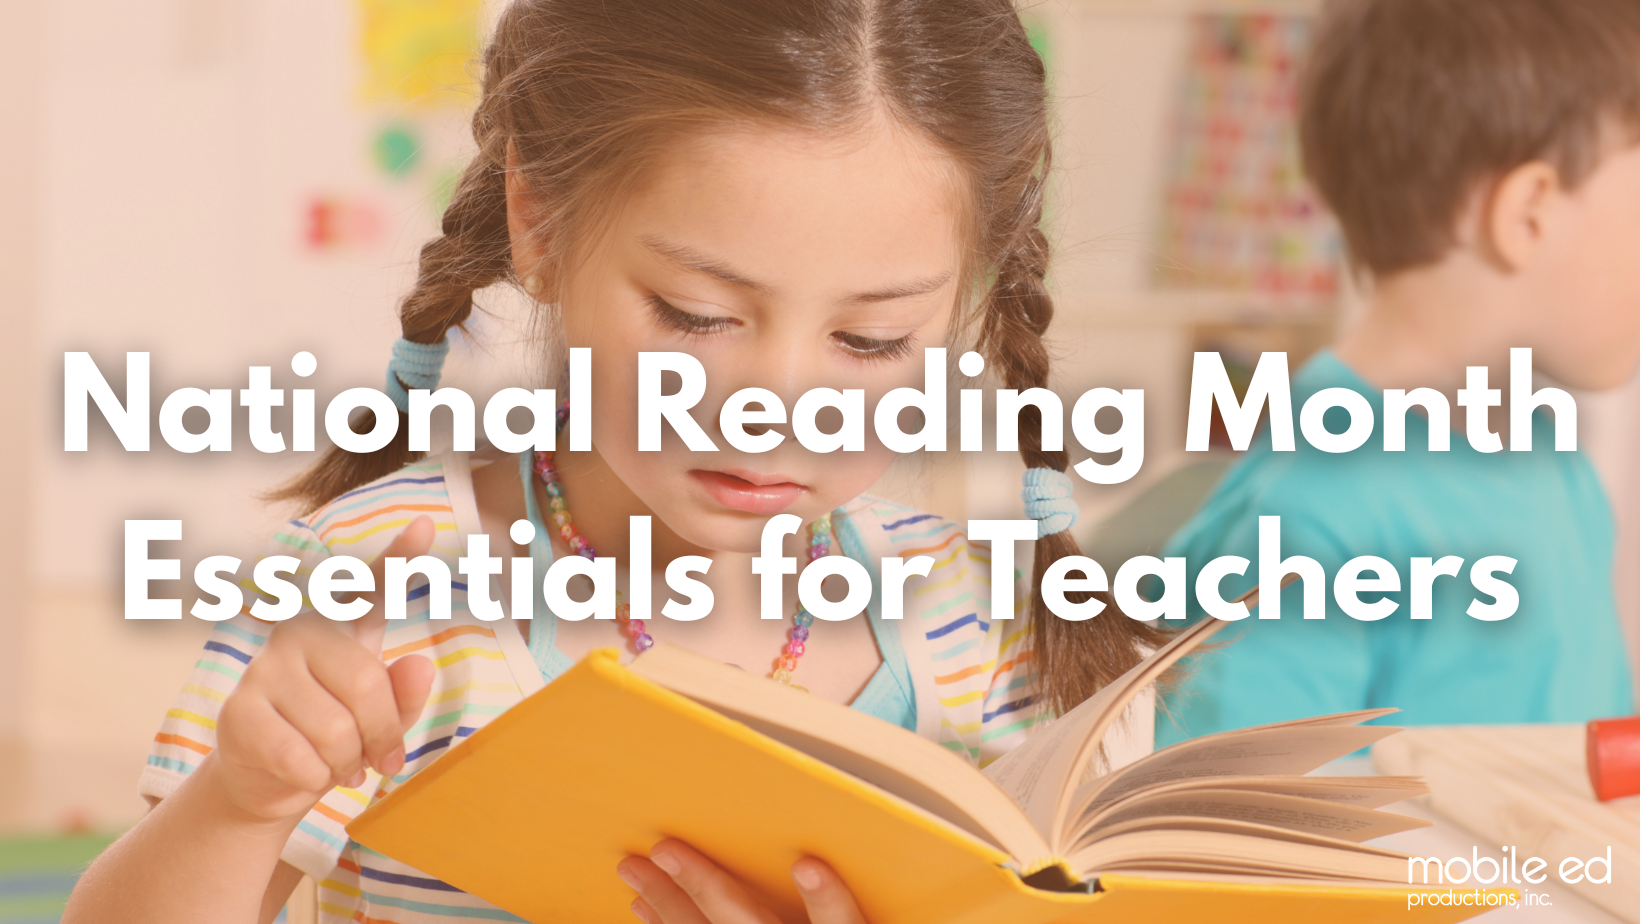 National Reading Month Essentials for Teachers